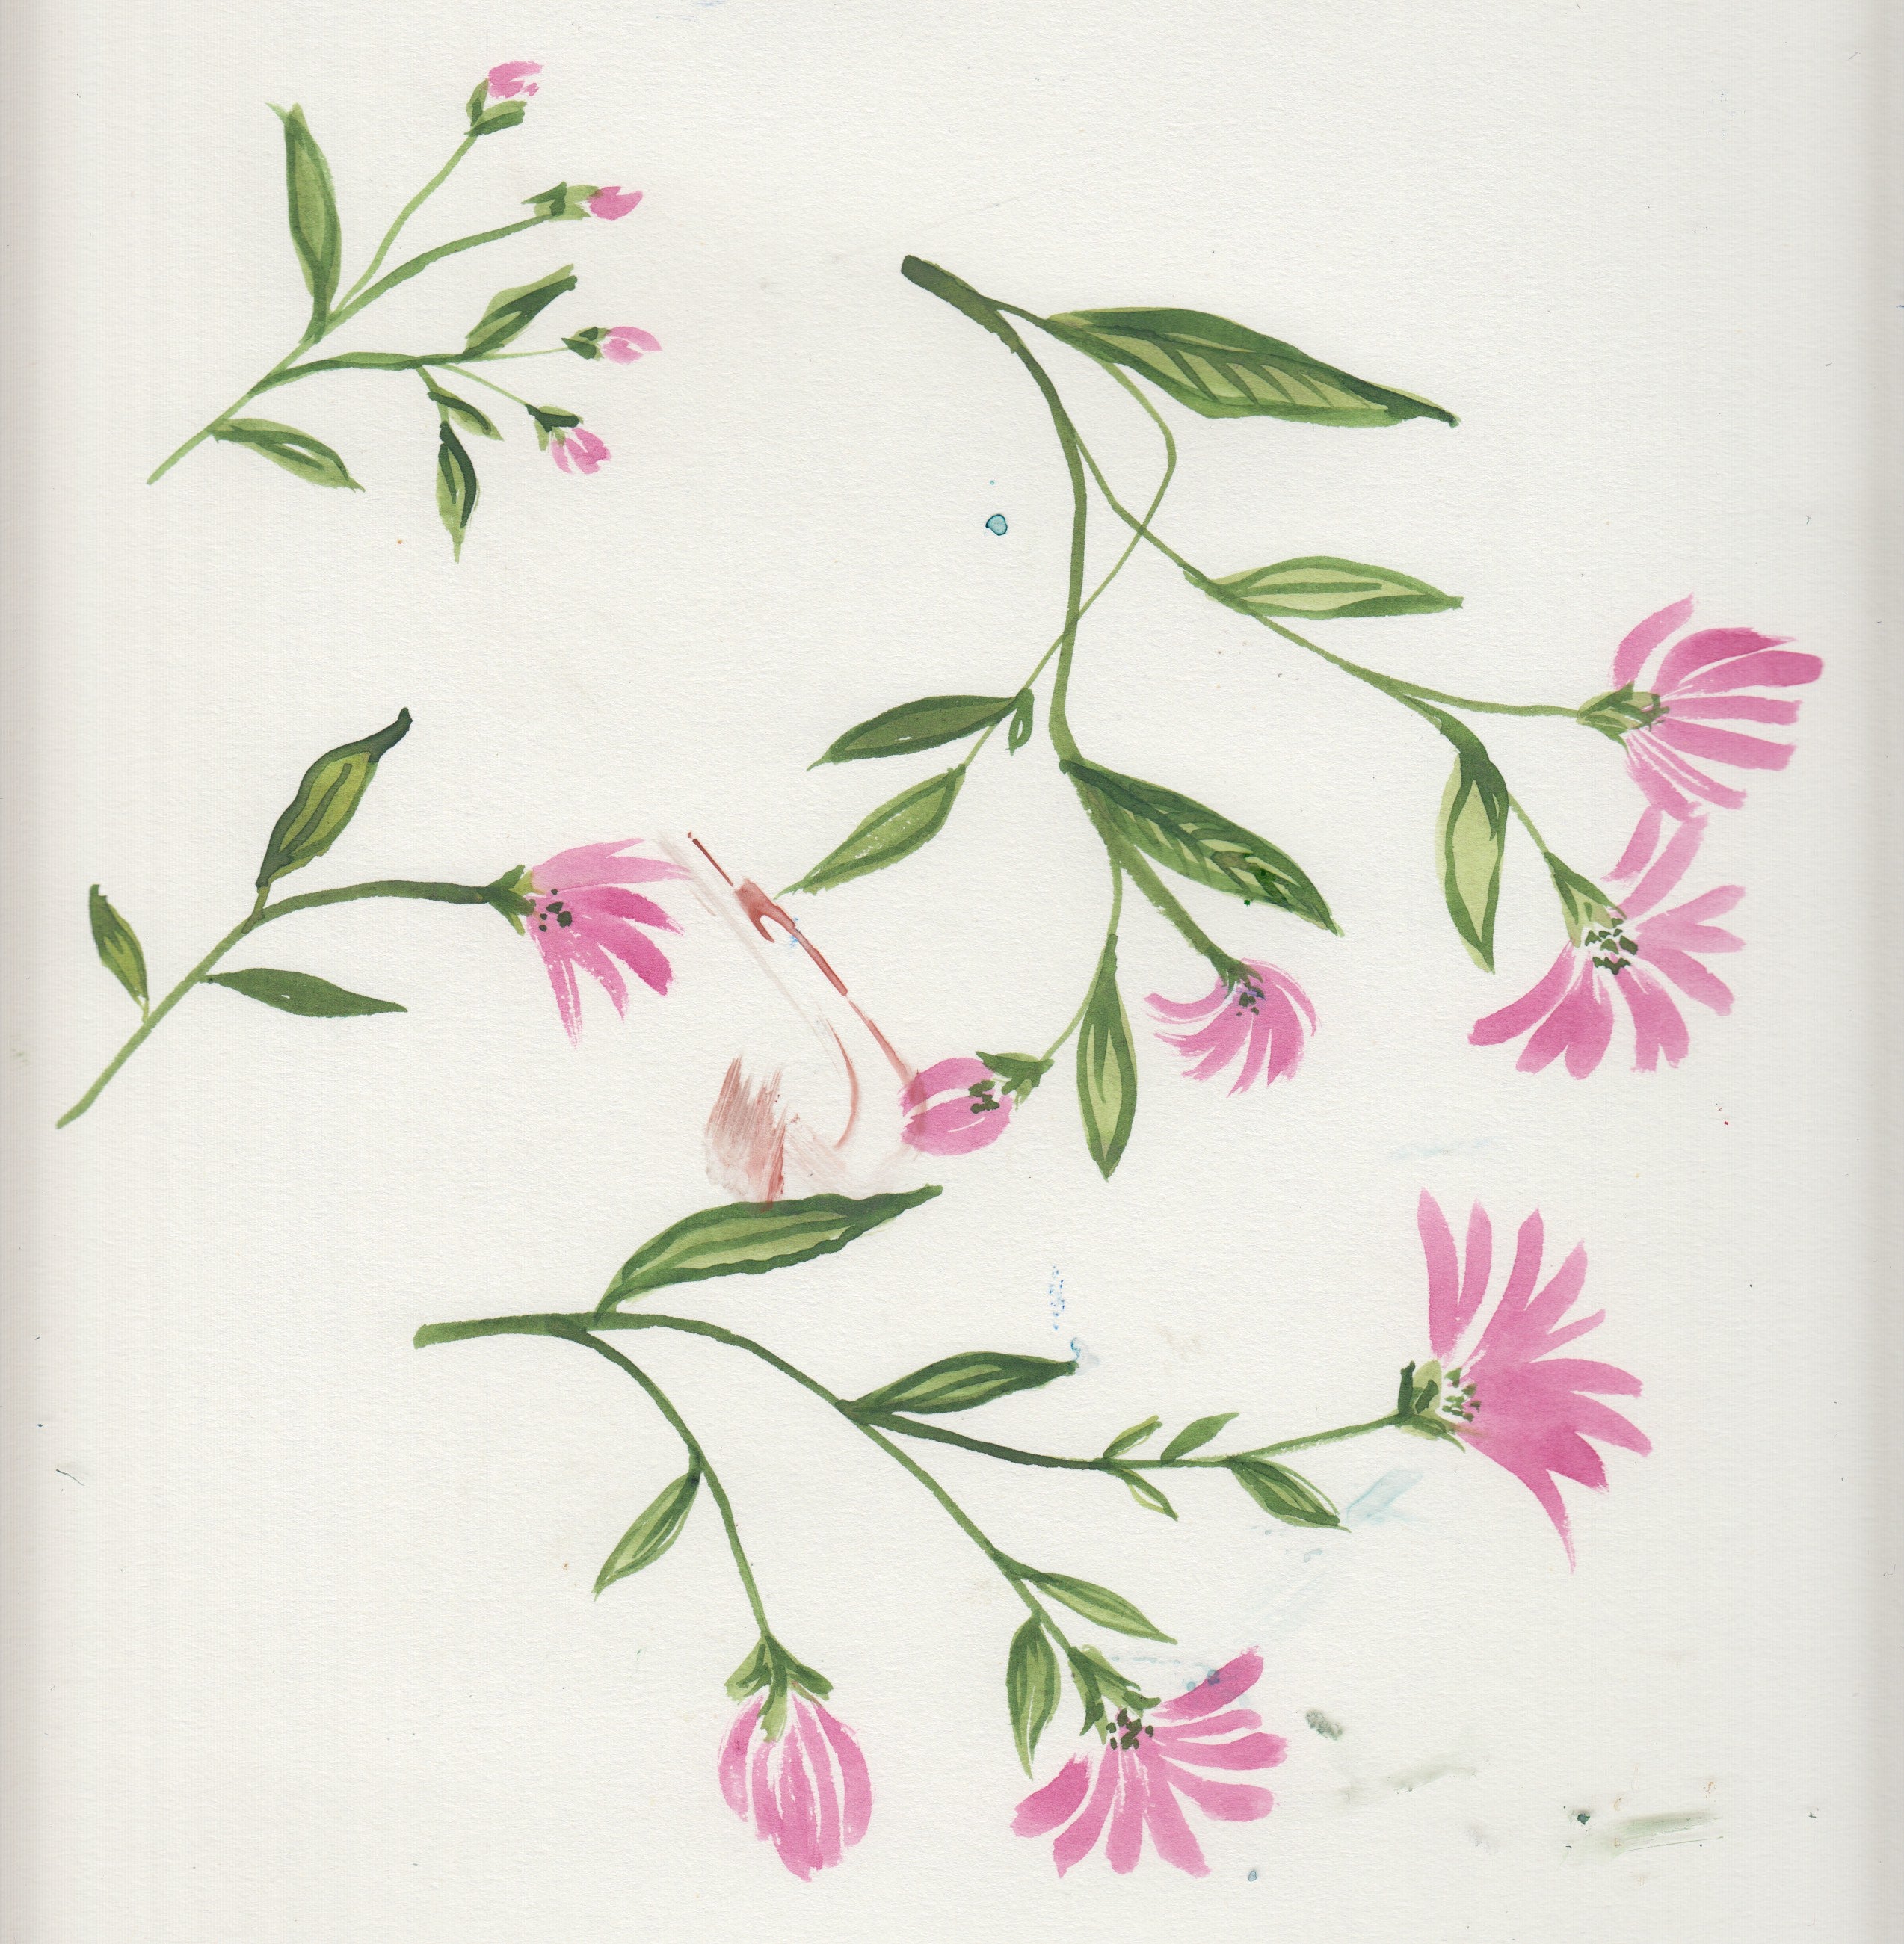 Pink and green floral watercolor artwork on a white background